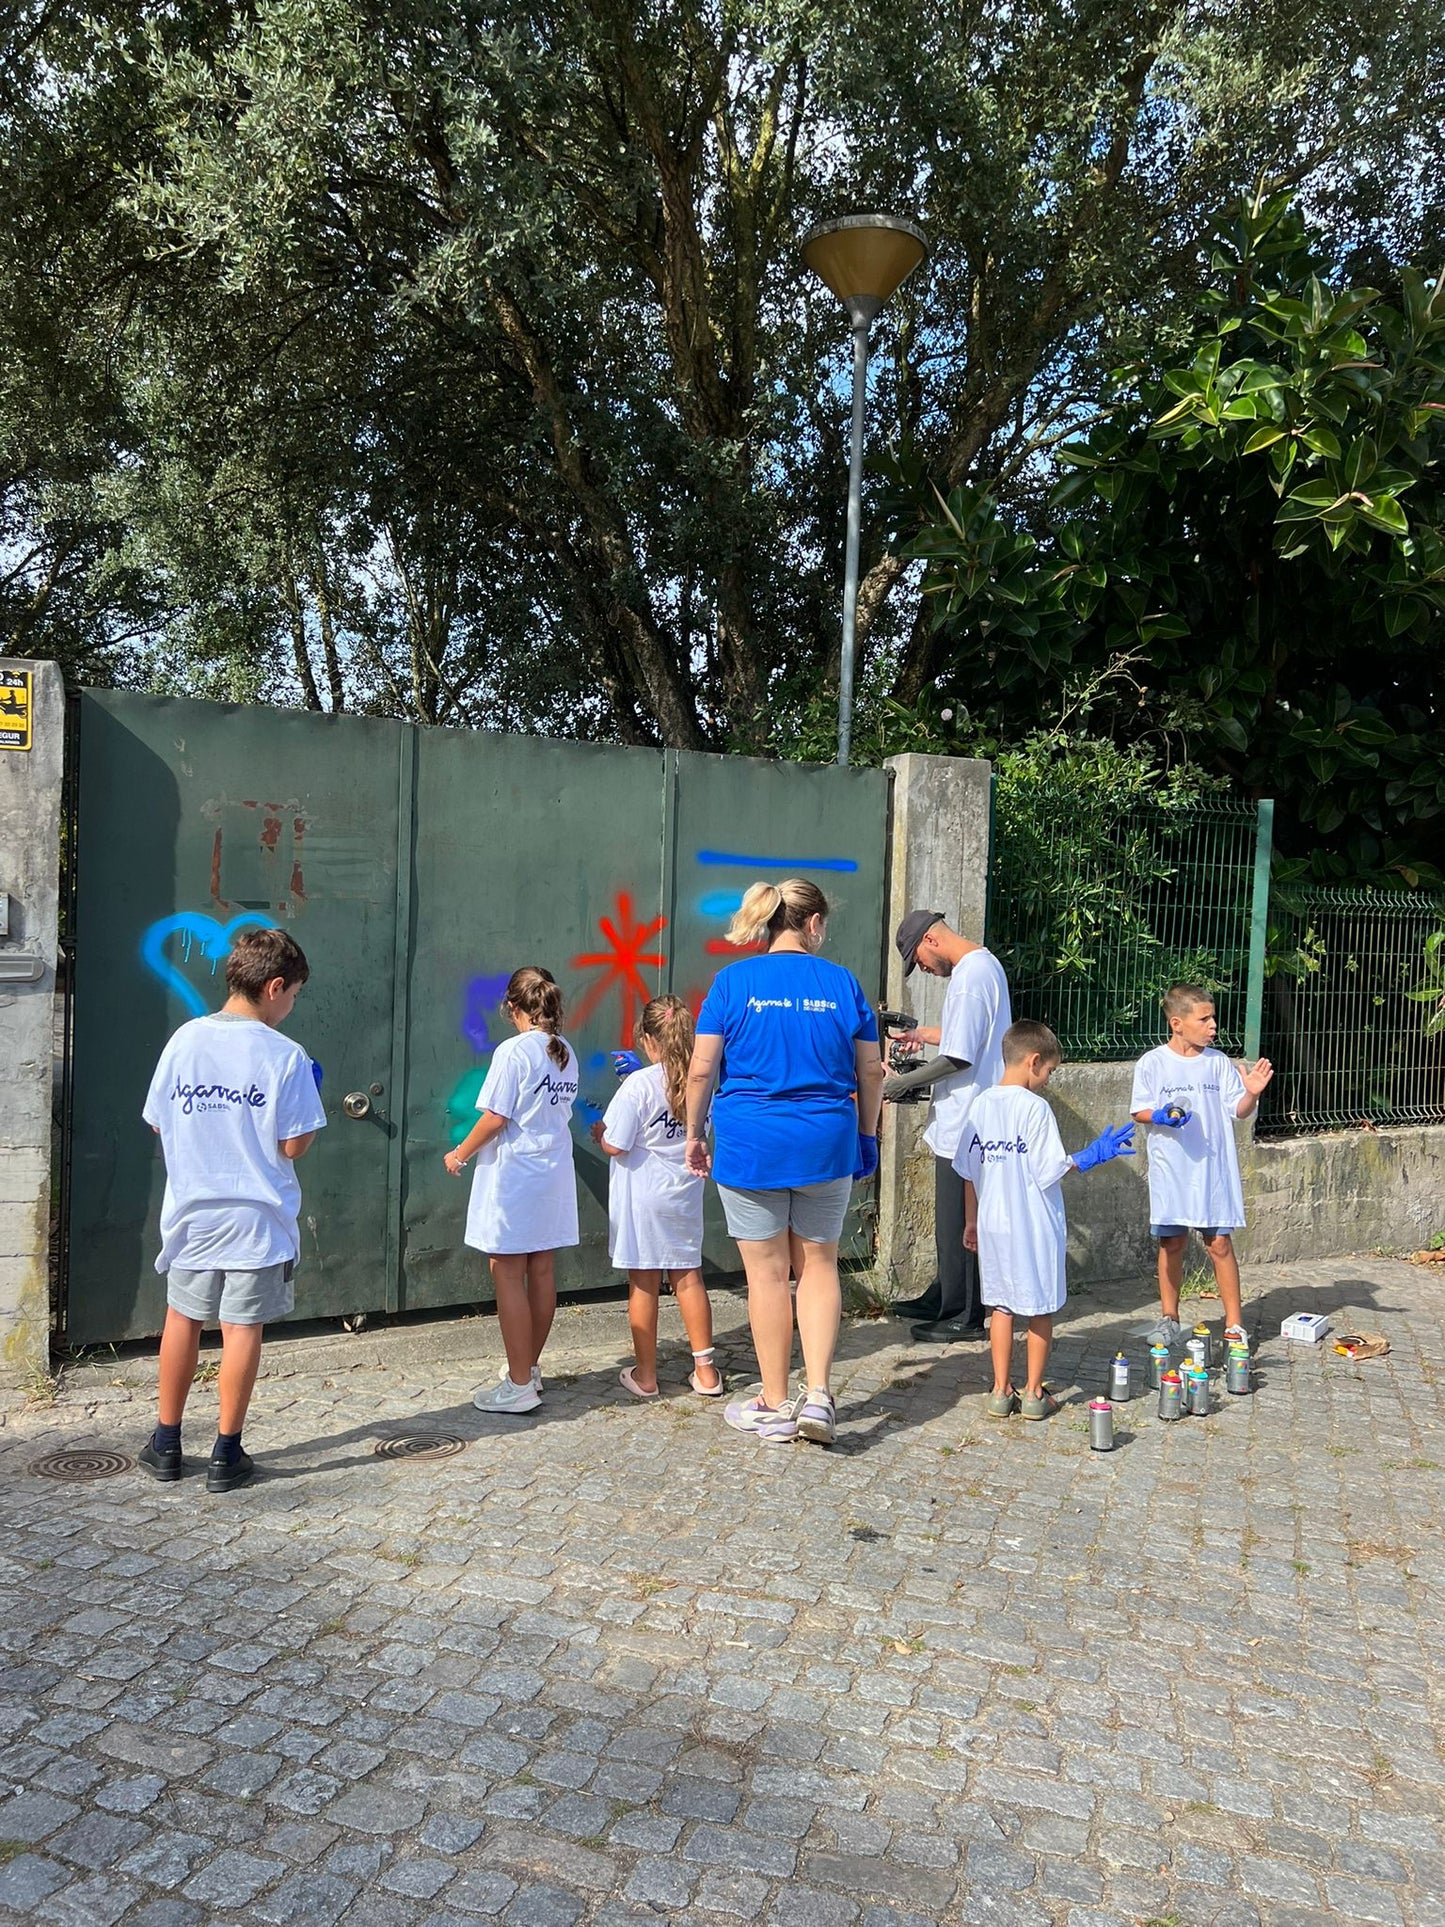 Graffiti Workshop with street artist Mariana in Porto, Portugal by subcultours